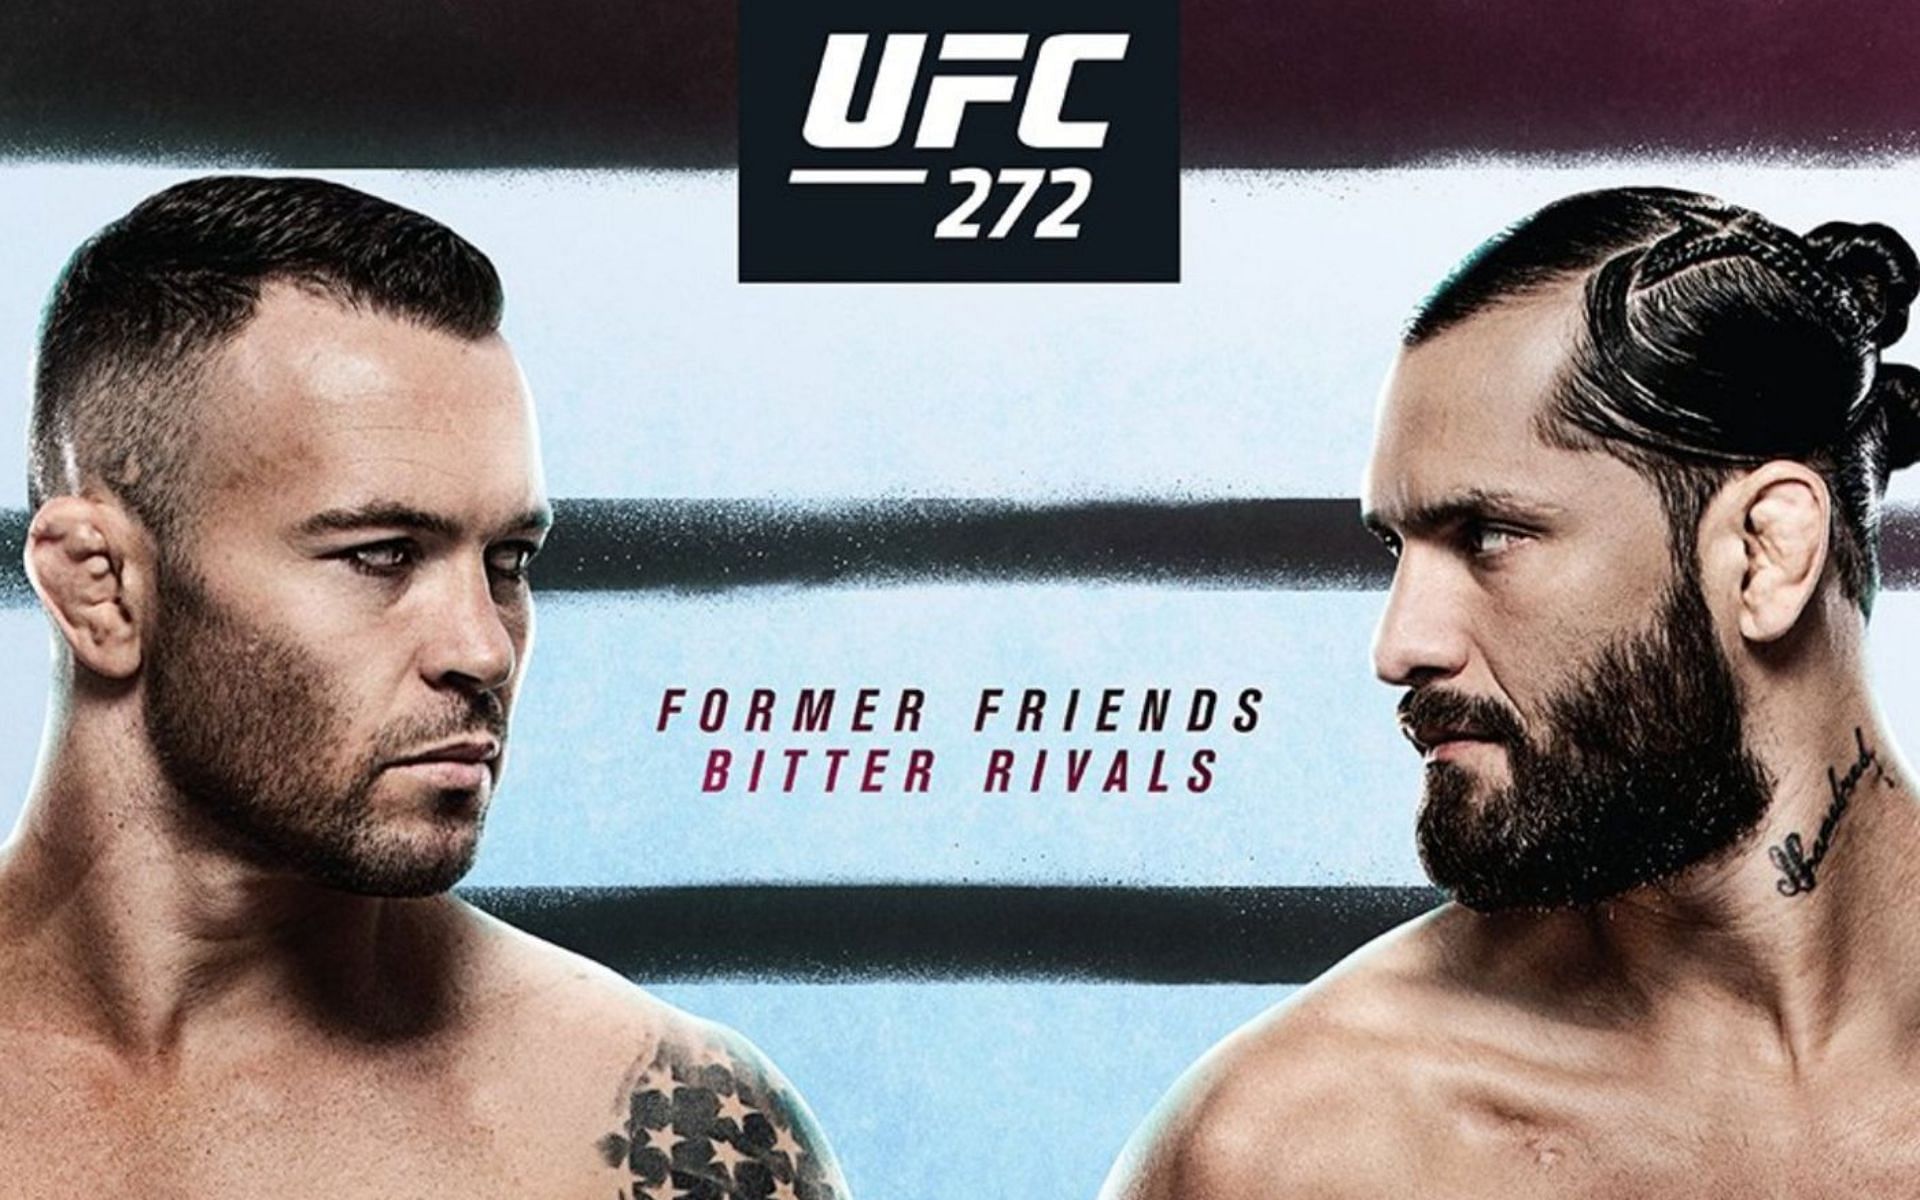 Bitter rivals Colby Covington and Jorge Masvidal finally go to war this weekend at UFC 272